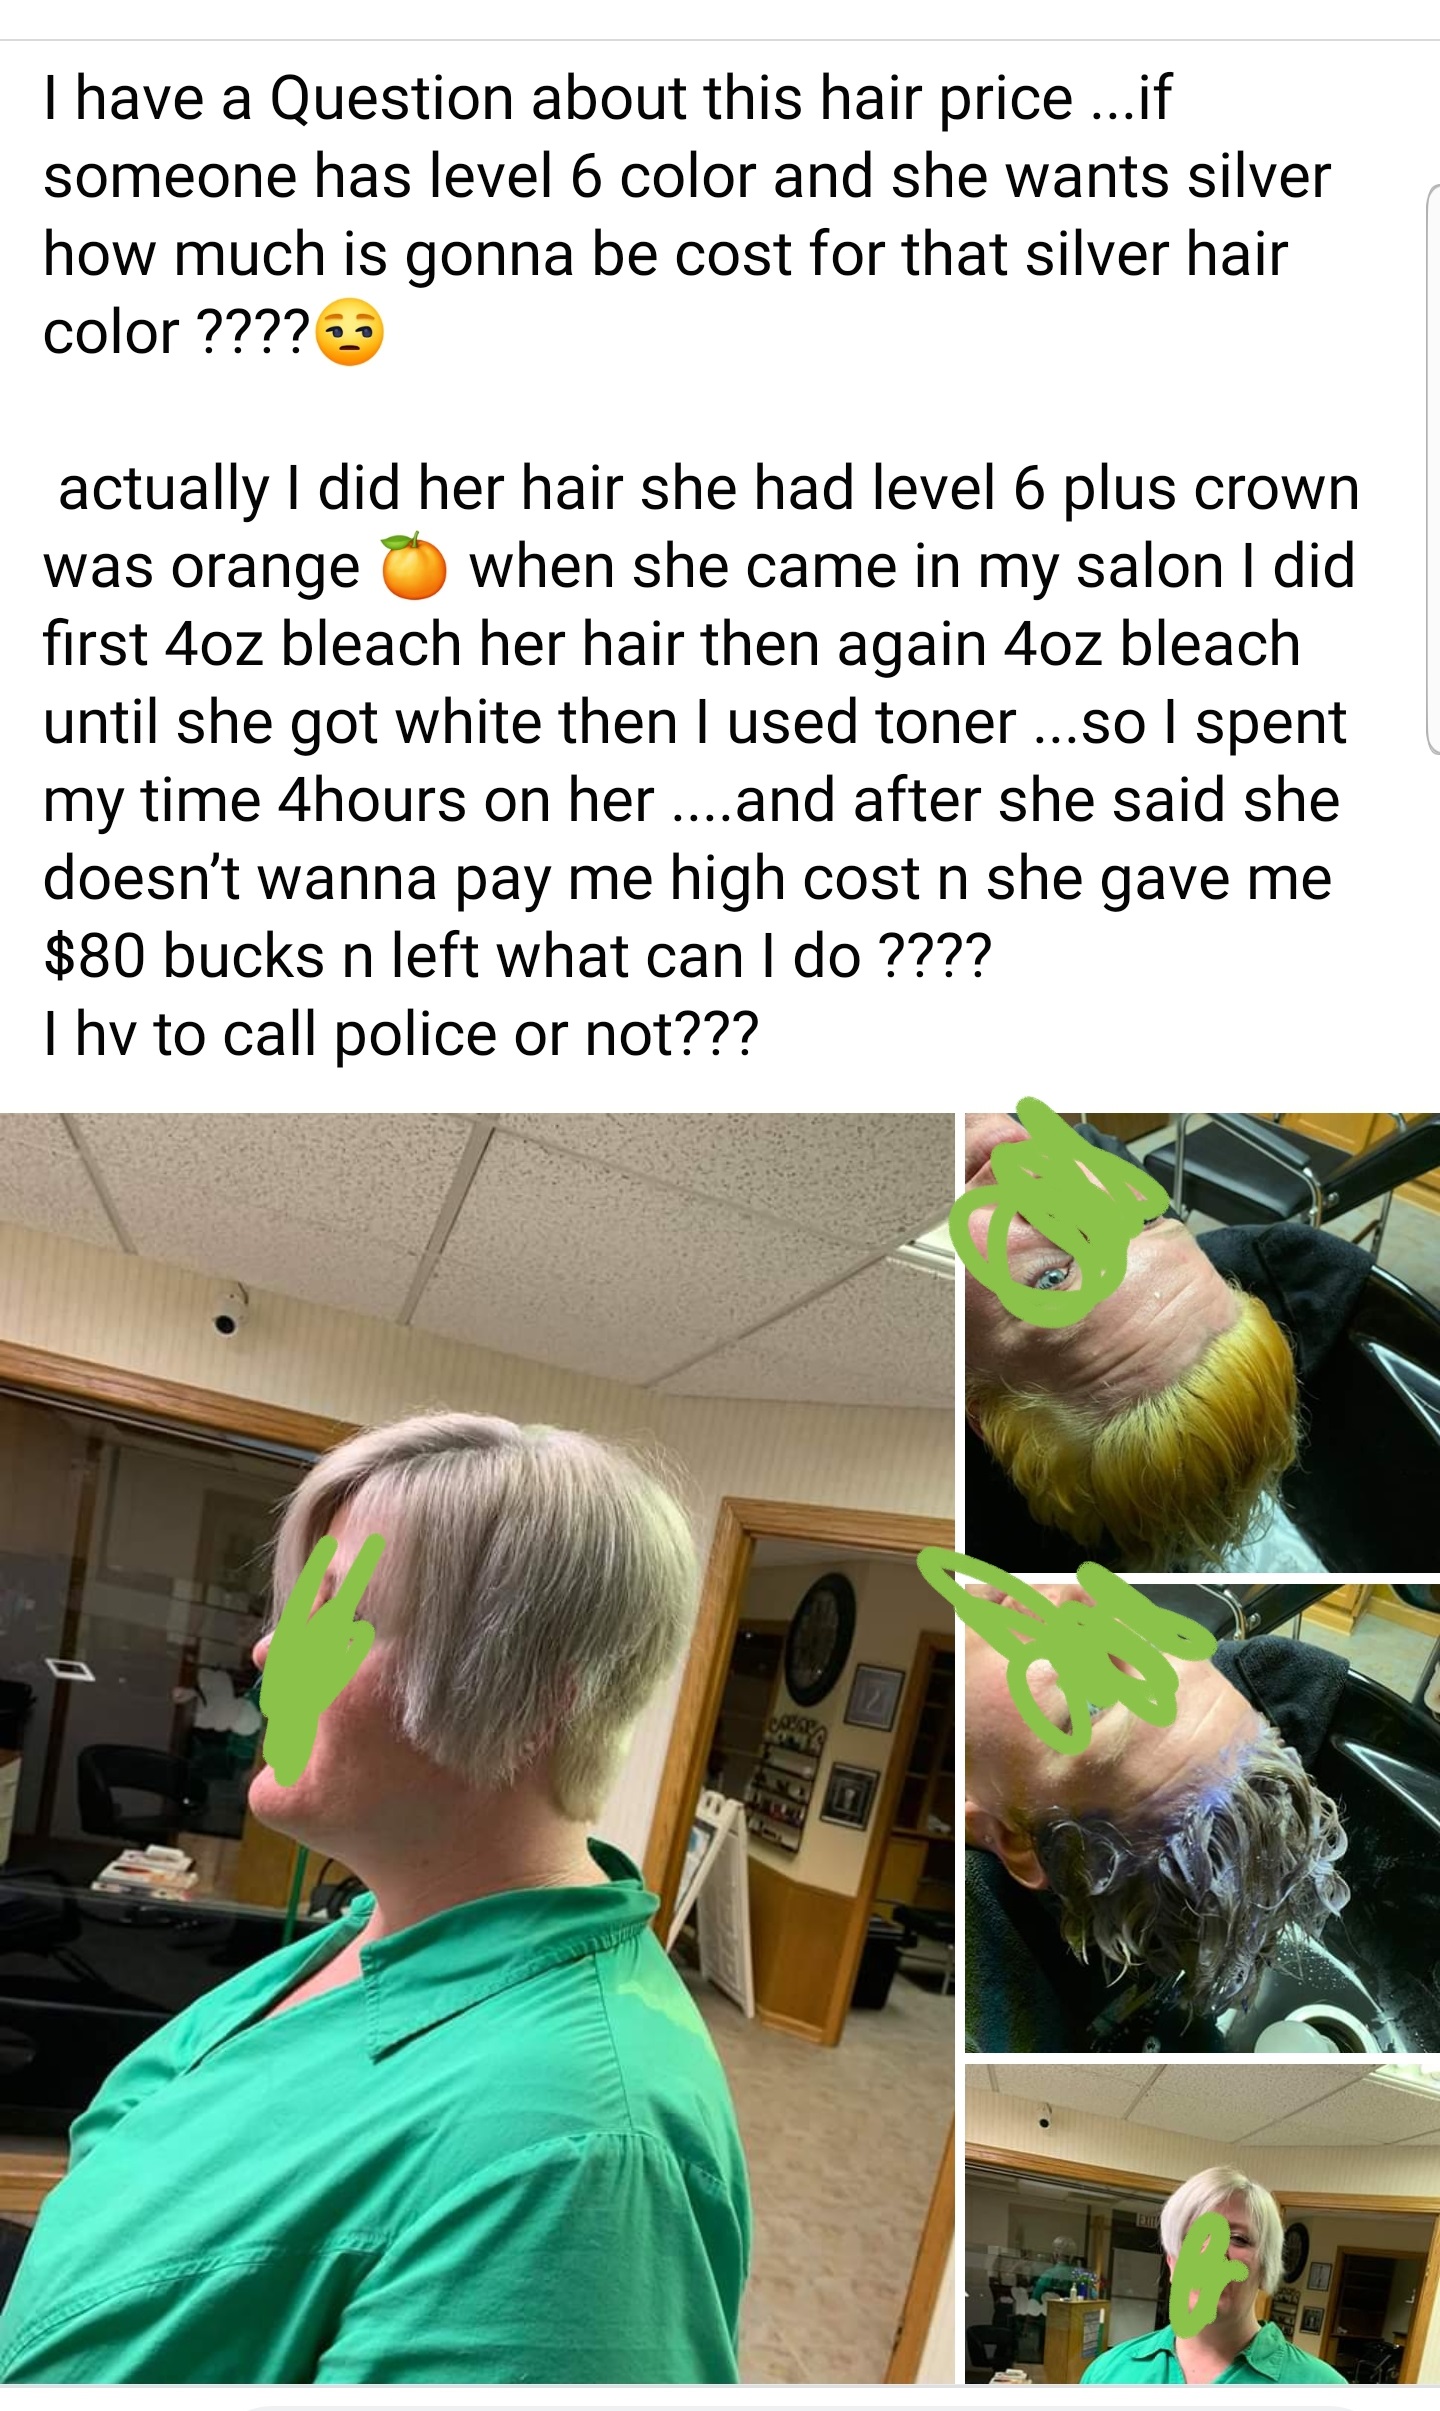 I have a Question about this hair price...if someone has level 6 color and she wants silver how much is gonna be cost for that silver hair color ???? actually I did her hair she had level 6 plus crown was orange when she came in my salon I did first 4oz…